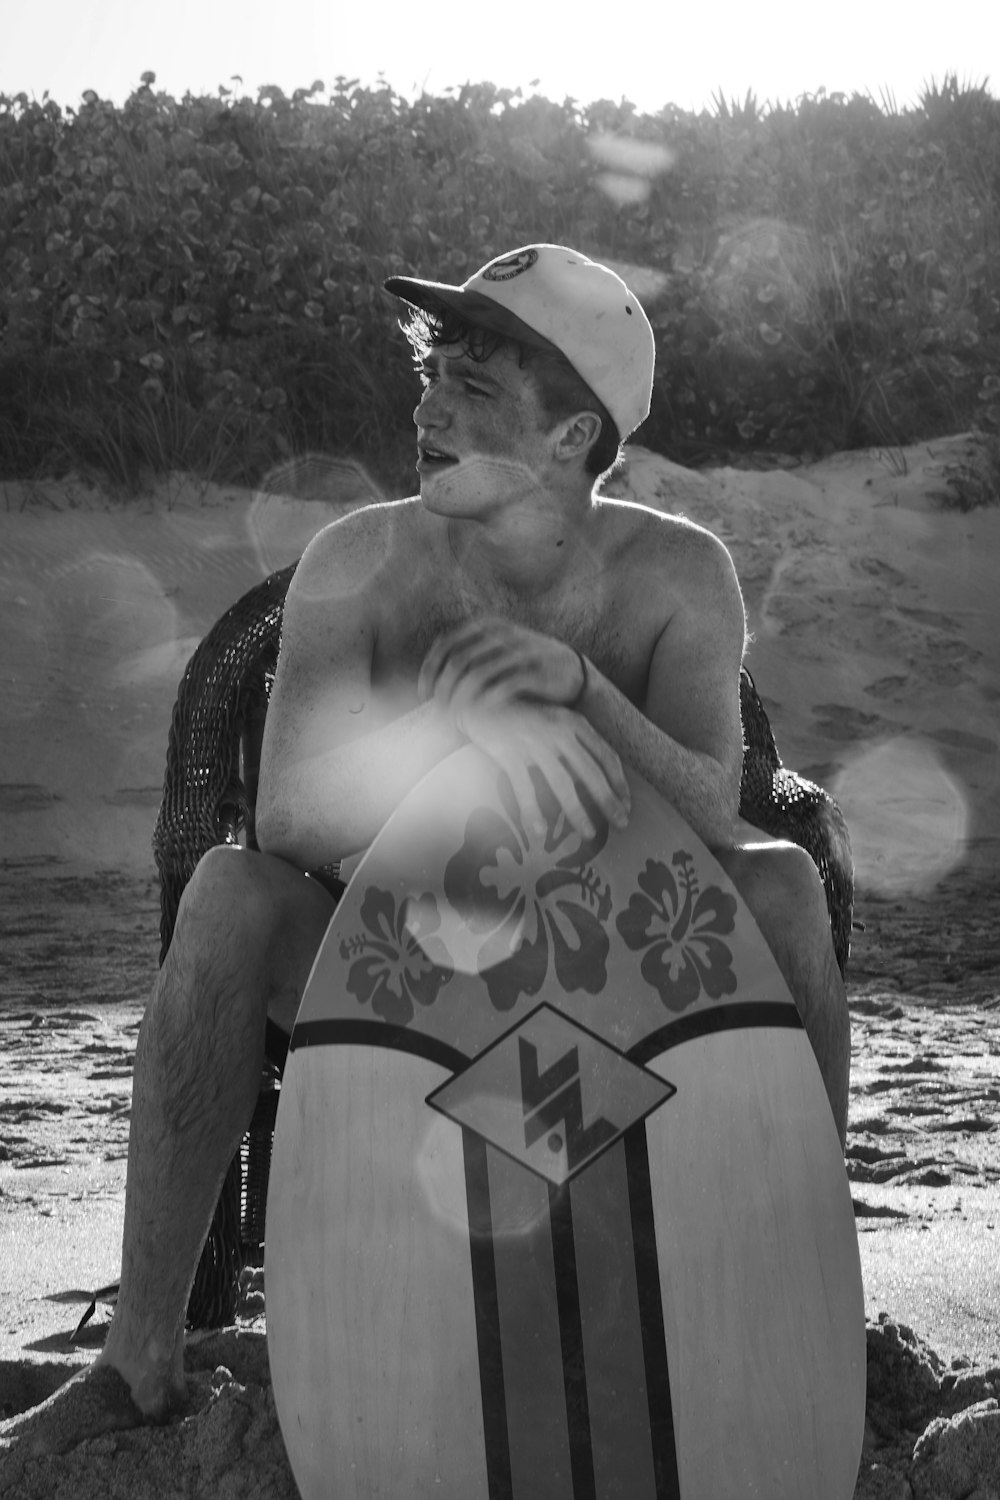 grayscale photo of man wearing hat and holding surfboard